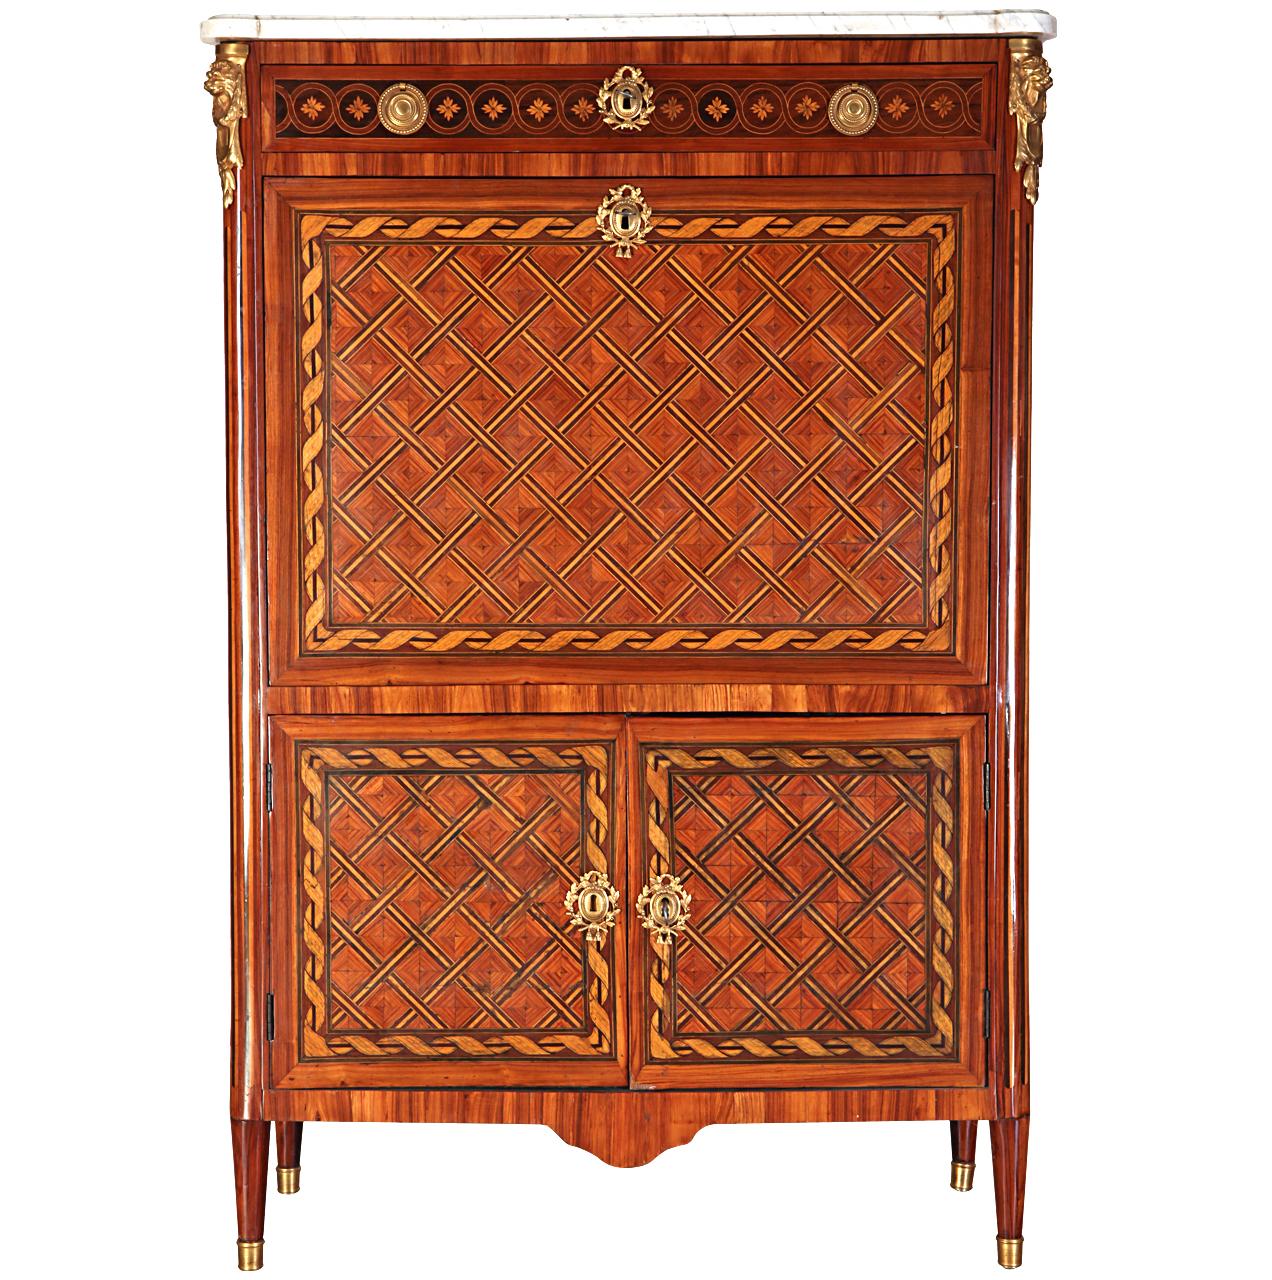 Important French ormolu-mounted, kingwood, tulipwood and stained sycamore marqueterie and parquetry secretaire abattant with rectangular moulded white marble top, above a frieze drawer inlaid with flower heads, fall front enclosing a leather-lined